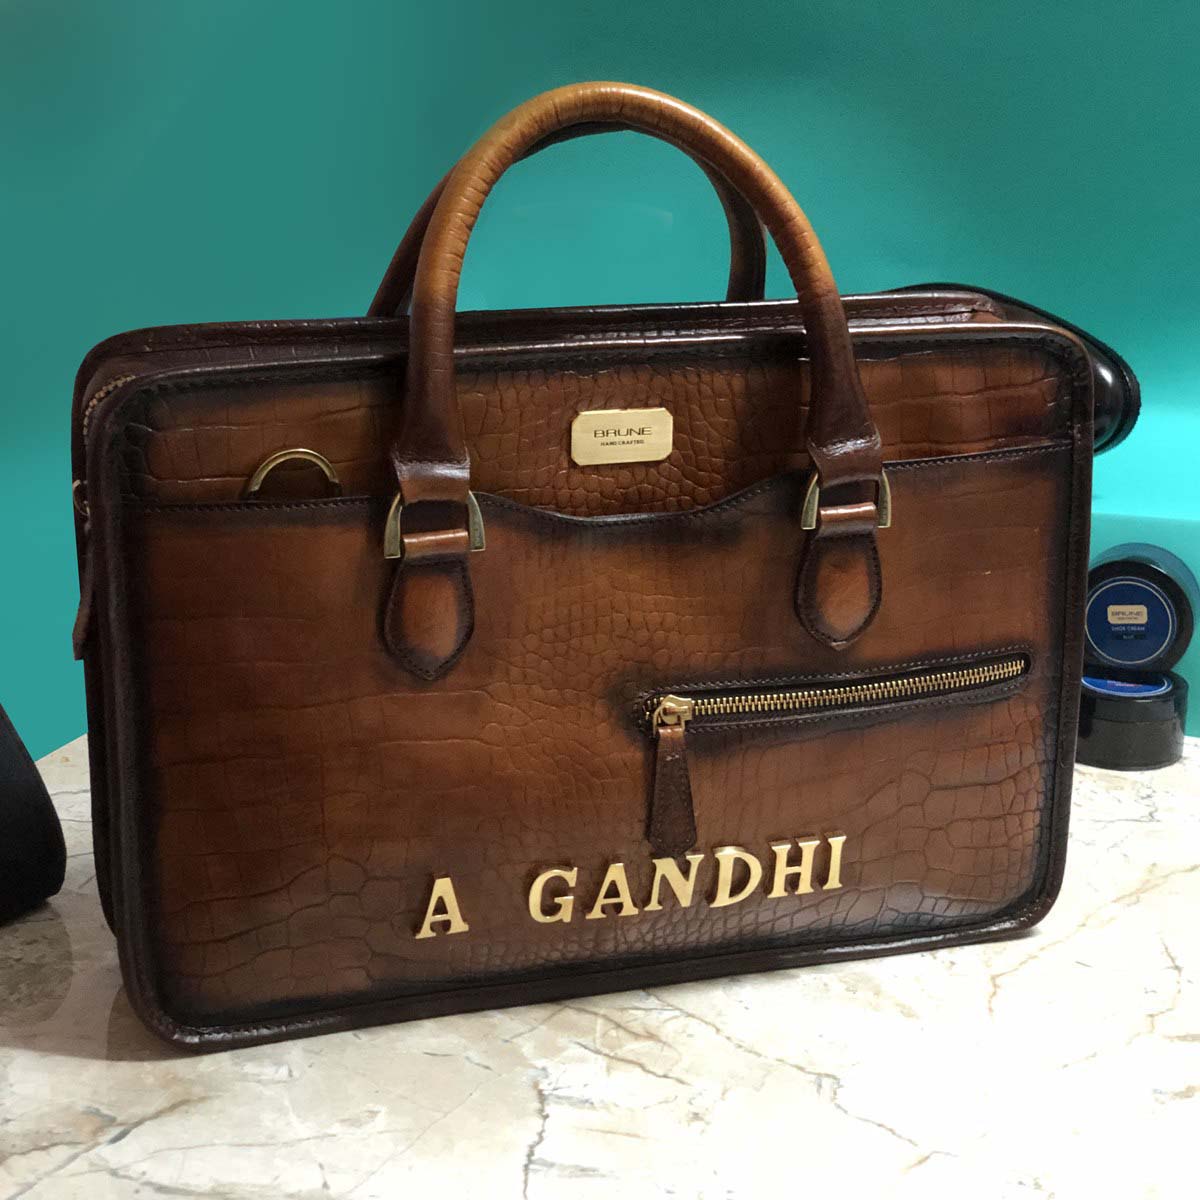 Personalized Tan Leather Laptop Bag with Name Initials A GANDHI by Brune & Bareskin